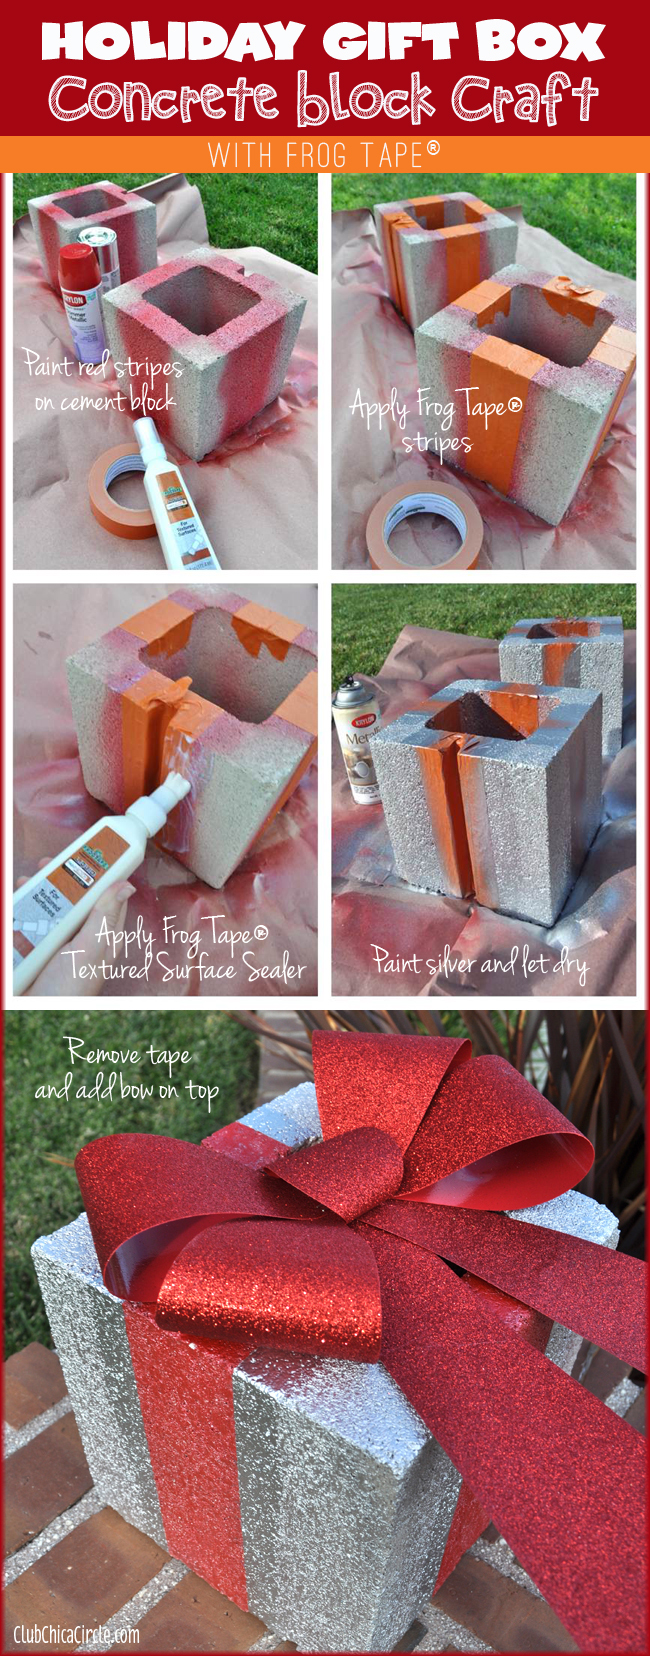 Cement Brick Holiday Gift Box Tutorial with Frog Tape®